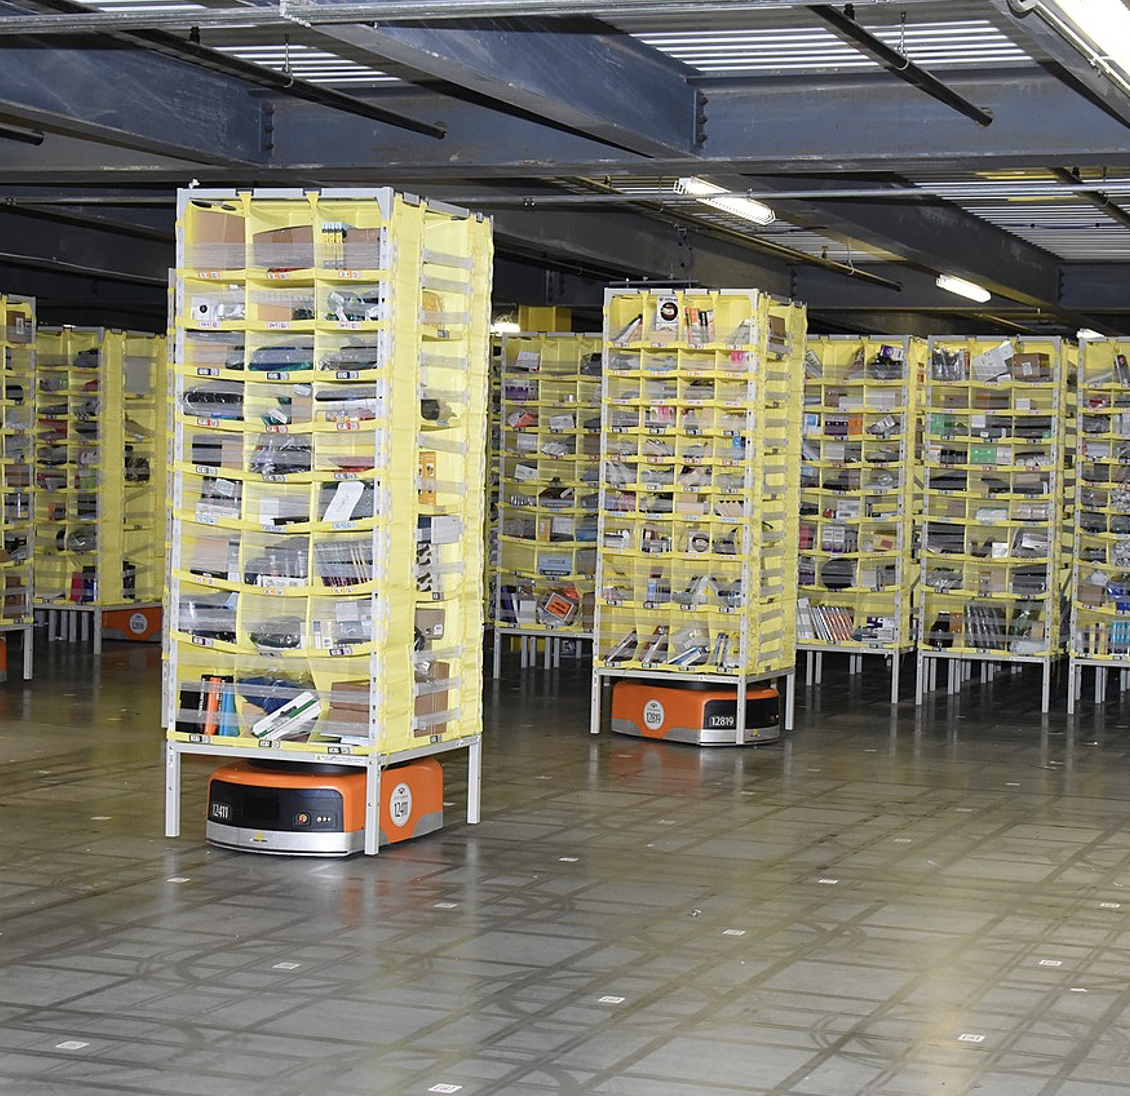 squat orange Kiva robots in a dimly lit low-ceiling warehouse. Each robot carries a stack of yellow trays. Cubbies in the trays hold Amazon products. There are grid marks on the concrete floor and white&black QR codes every 4 feet on the gridlines.